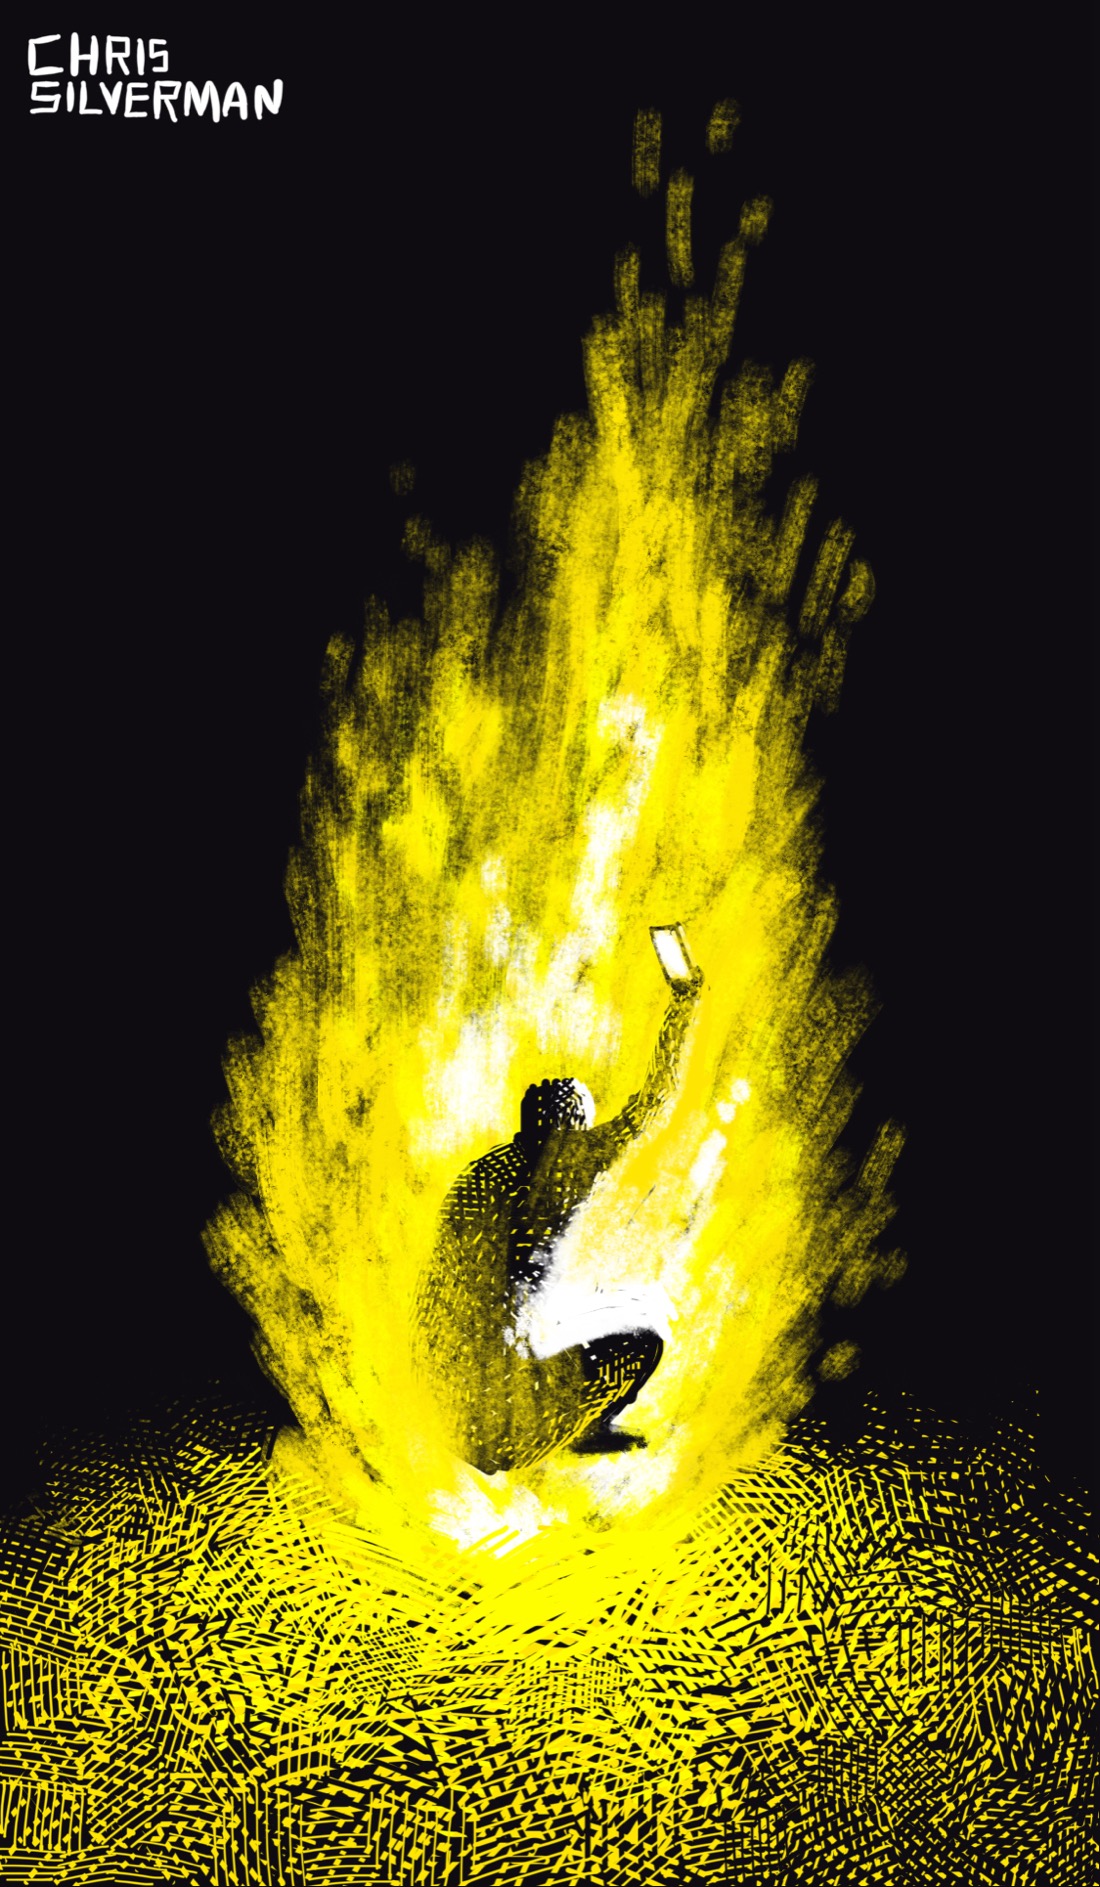 A roaring yellow bonfire at night, casting a yellow glow all around it. Sitting directly in the middle of the bonfire, at the heart of the white flames, is a person taking a selfie. That's it. That's the tweet.